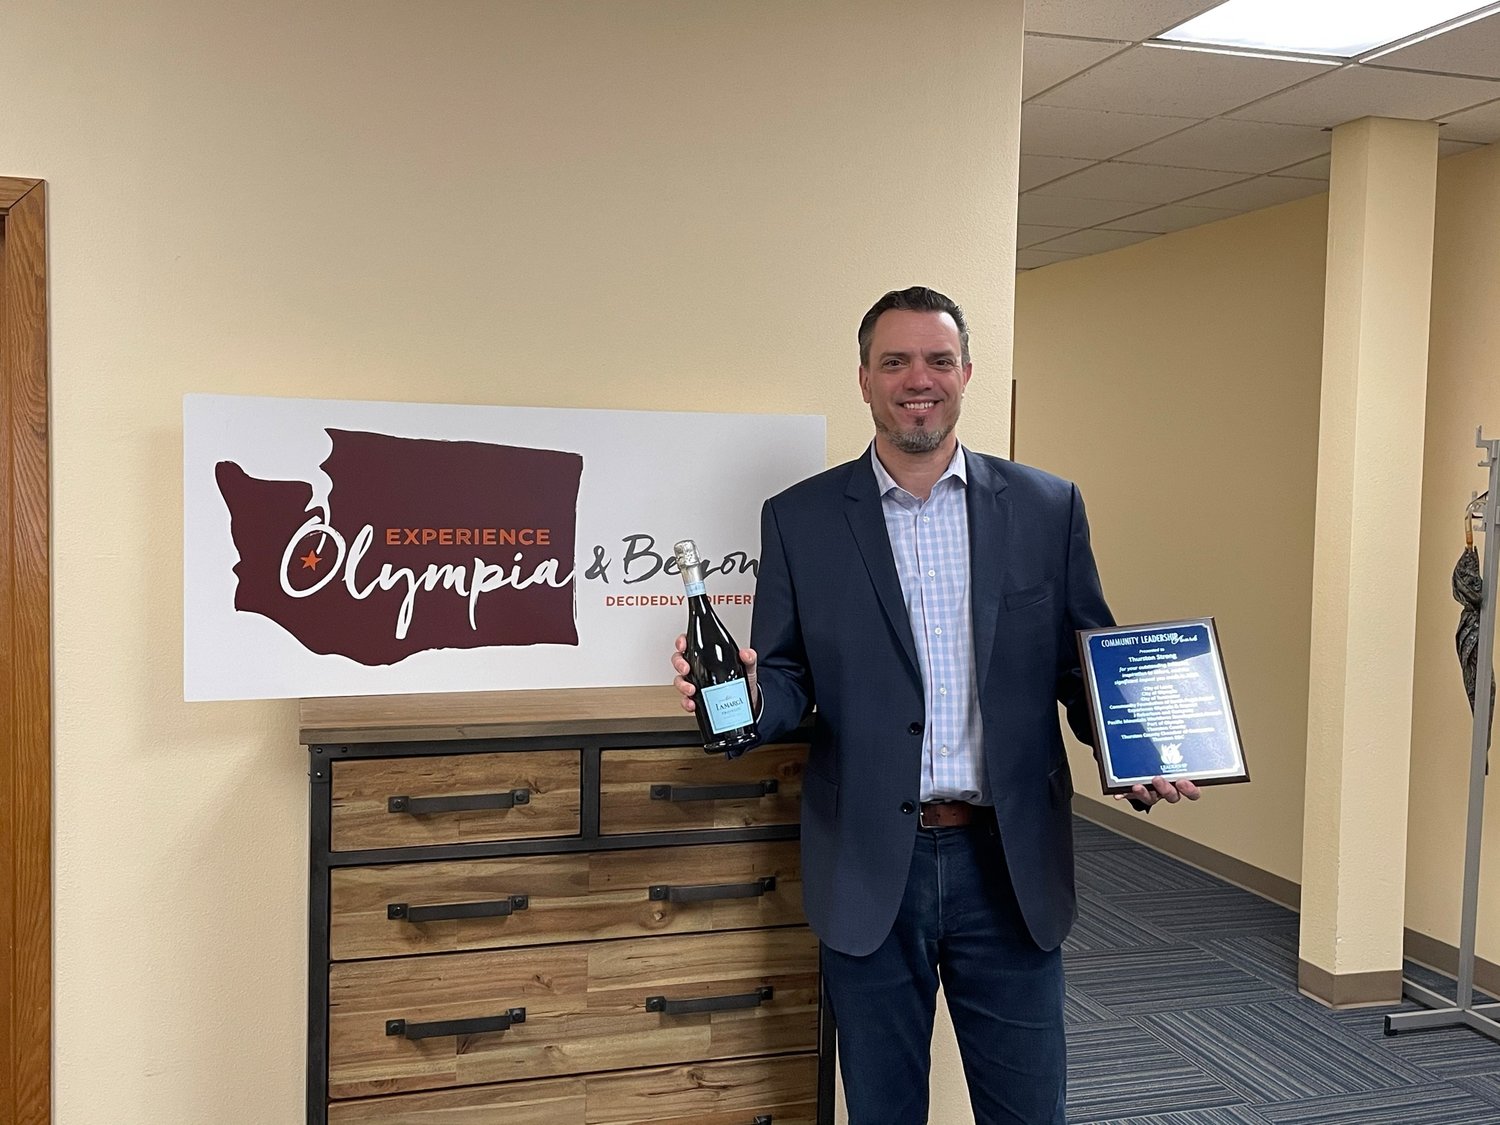 Jeff Bowe, Interim Executve Director of Experience Olympia & Beyond, accepts the 2020 Community Leadership Award from Leadership Thurston County (LTC) for the organization's part in the Thurston Strong initiative.